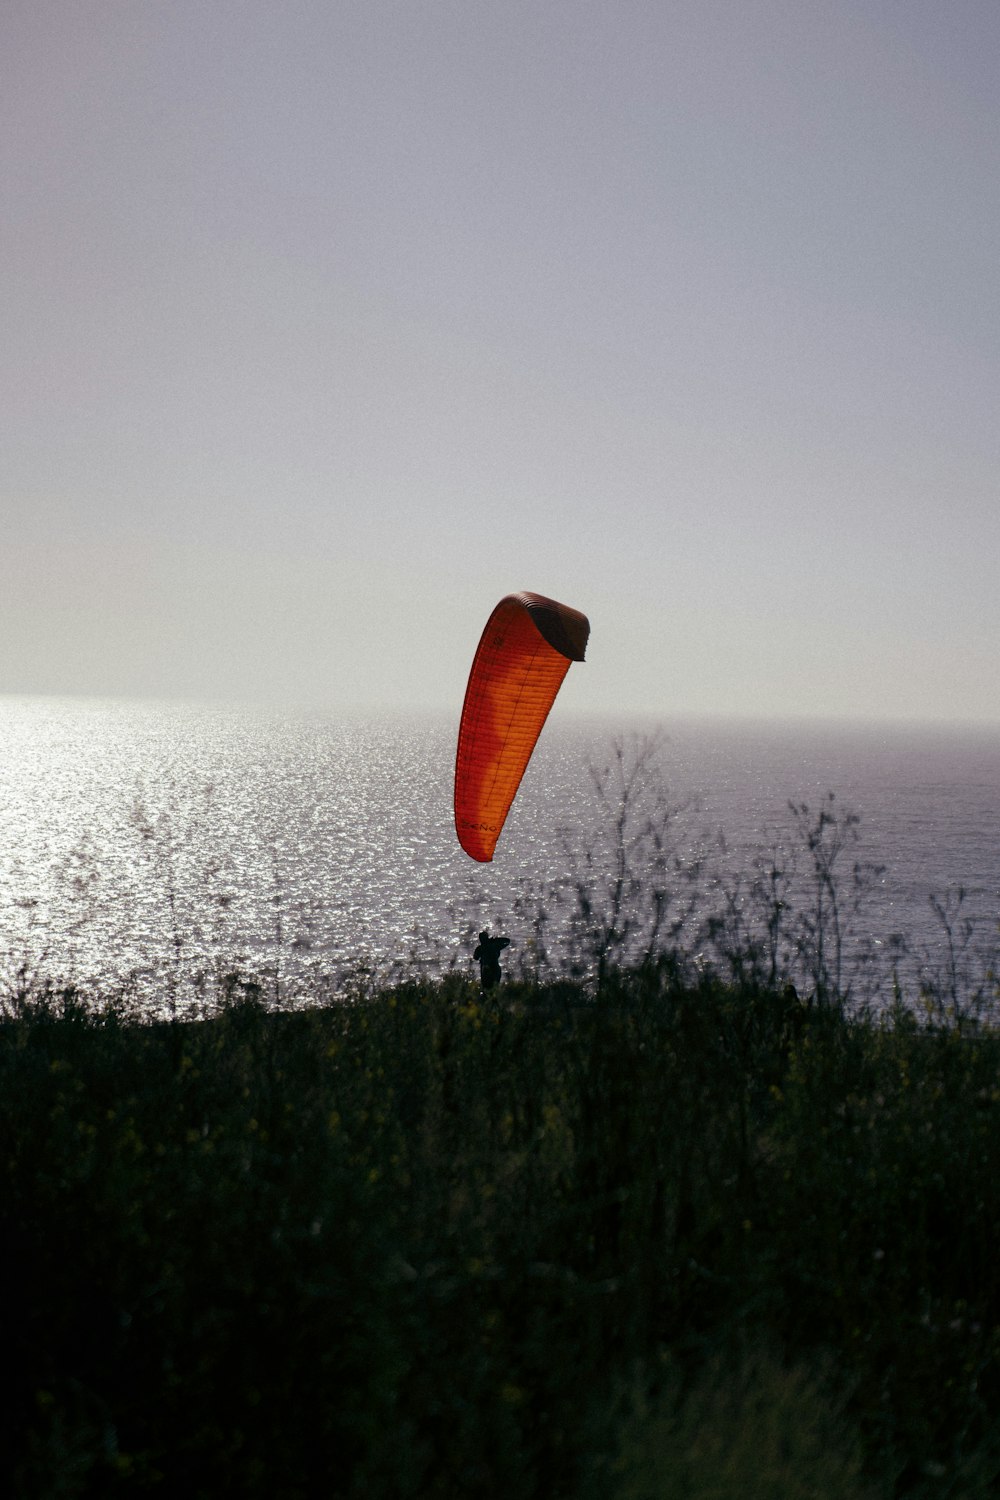 a person flying a kite on top of a hill near the ocean